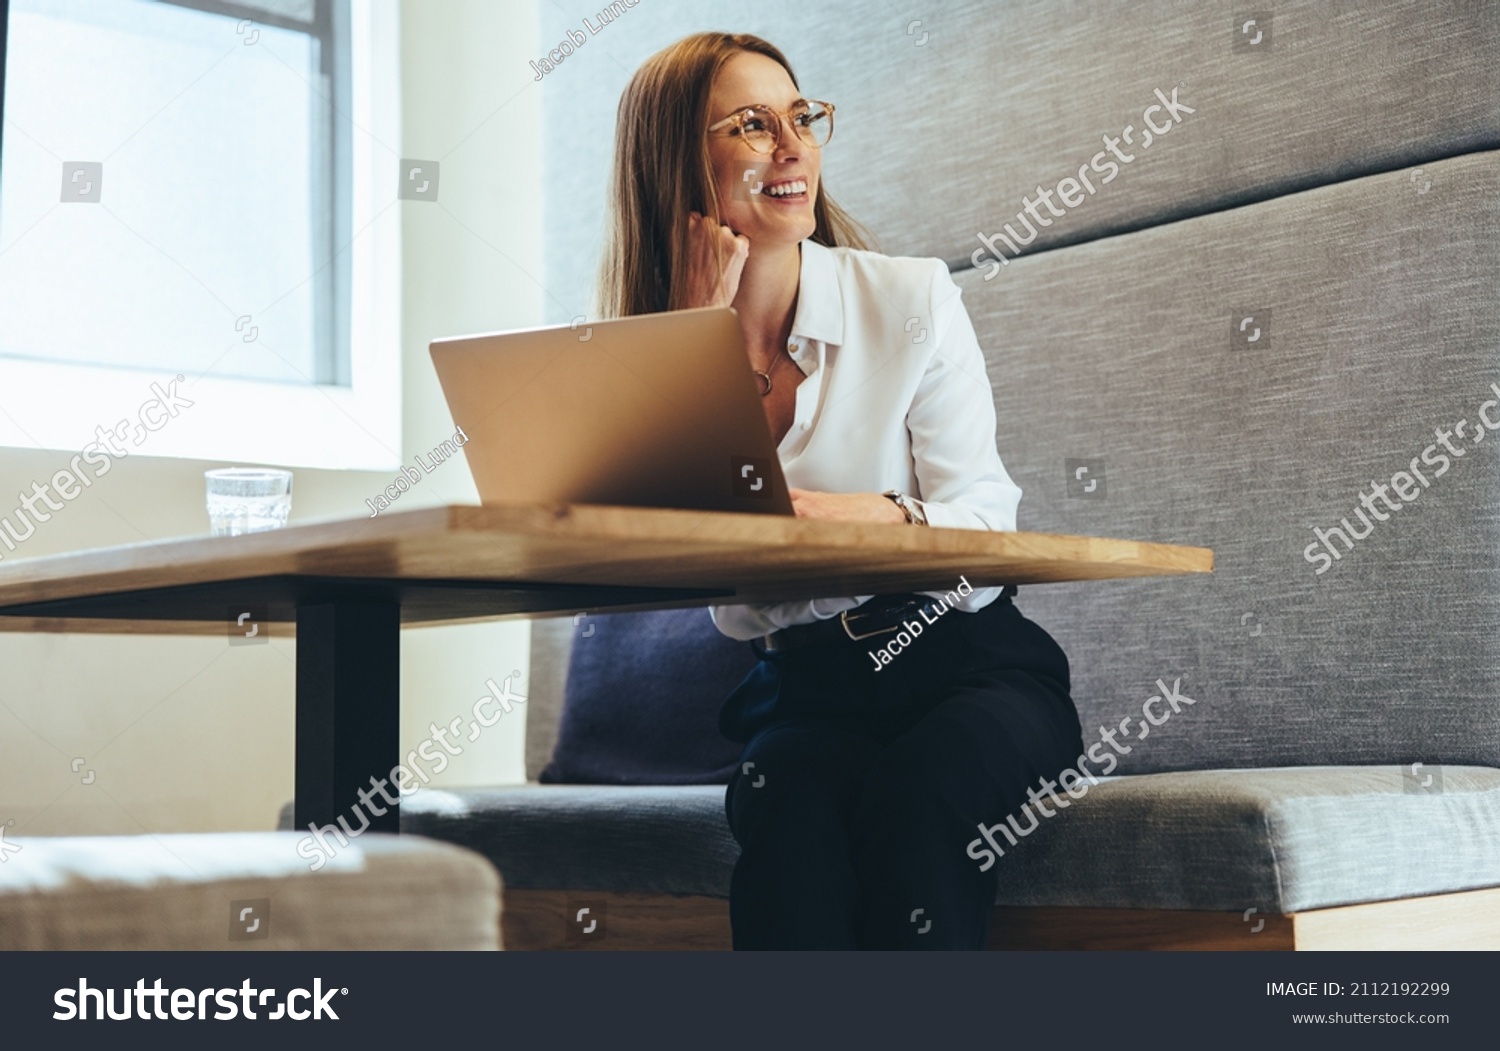 Excited businesswoman looking away thoughtfully. Happy young businesswoman smiling while contemplating business ideas. Young female entrepreneur working on a laptop in a modern workspace. #2112192299